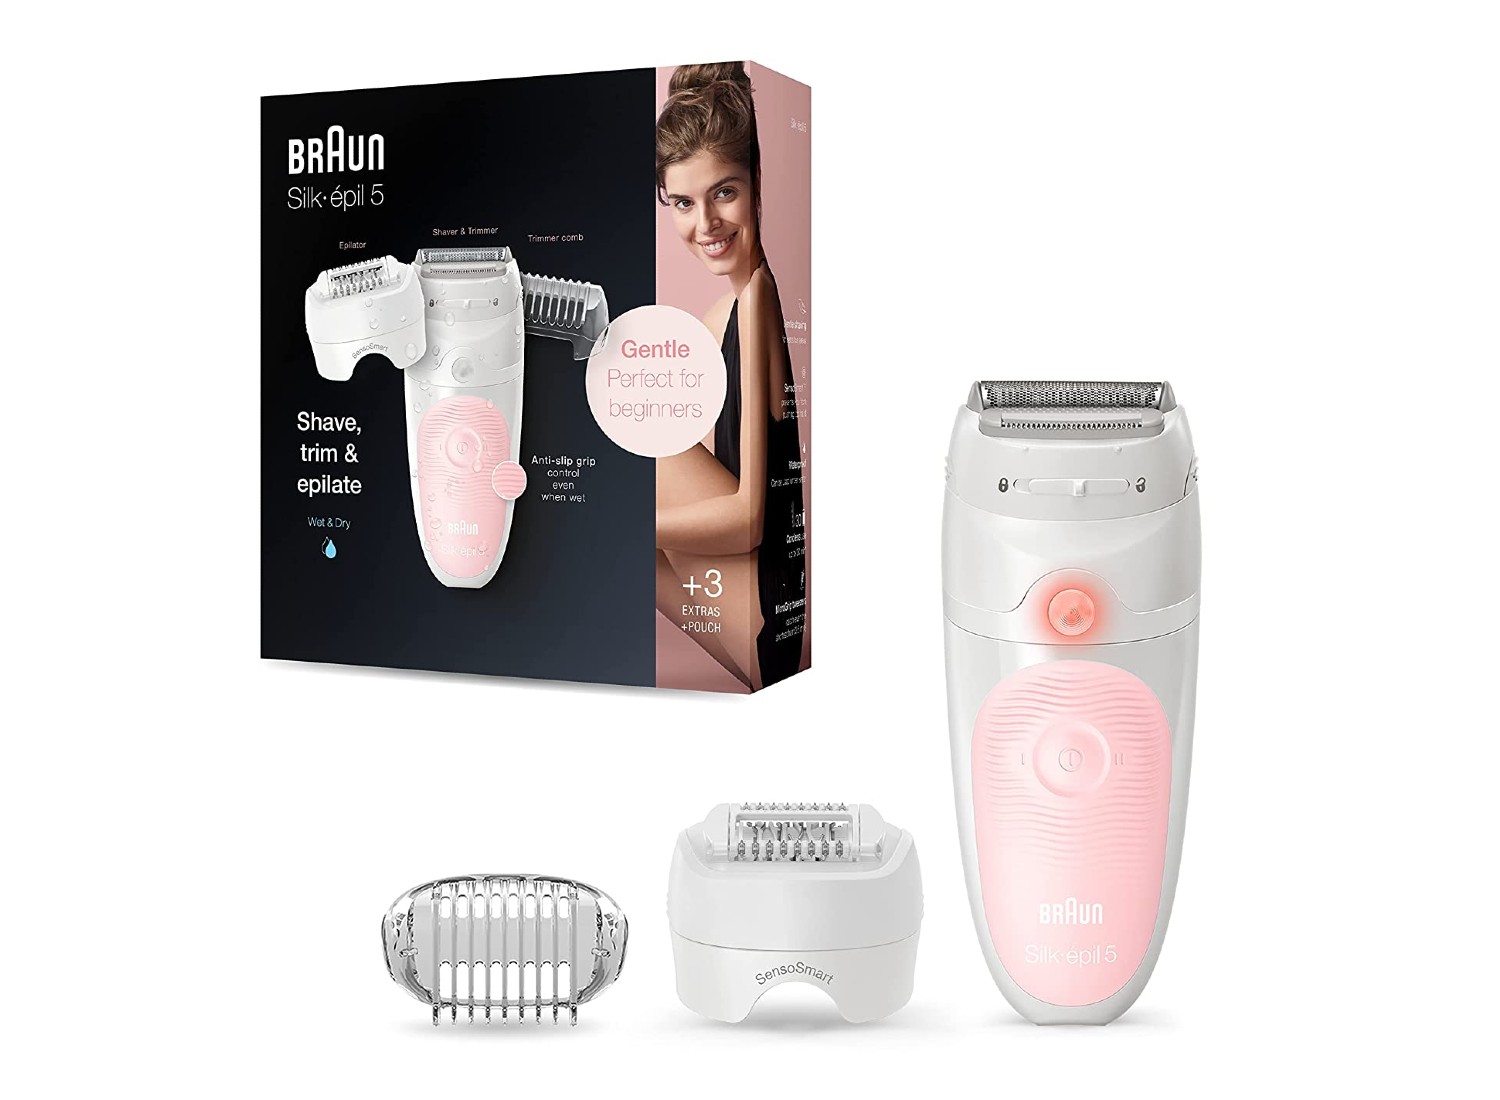 A hair removal device